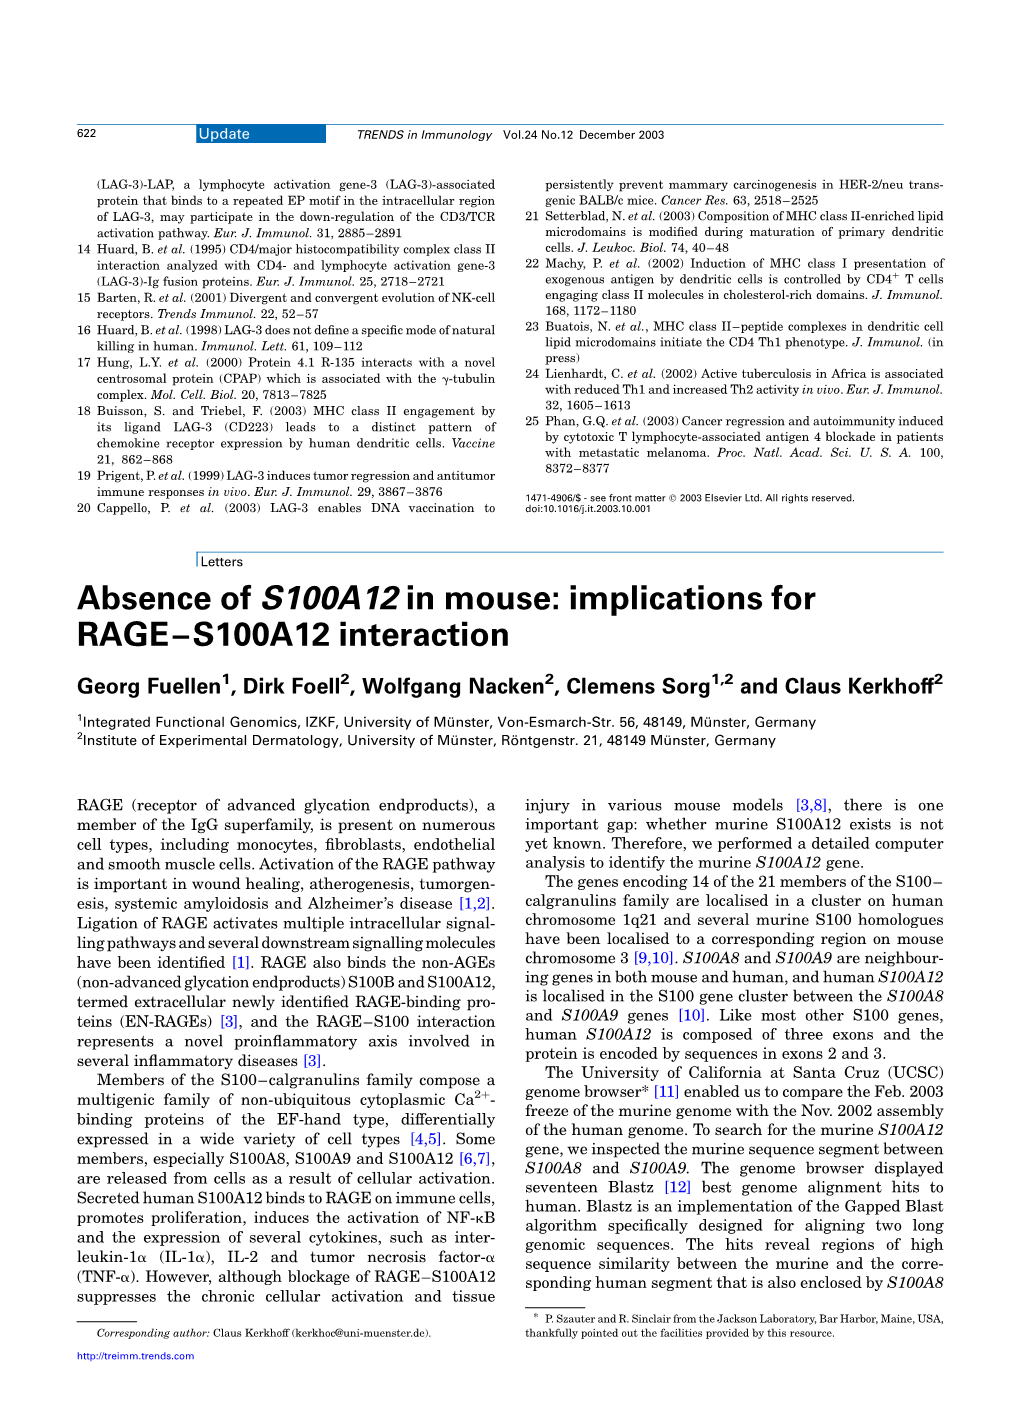 Absence of S100A12 in Mouse: Implications for RAGE–S100A12 Interaction